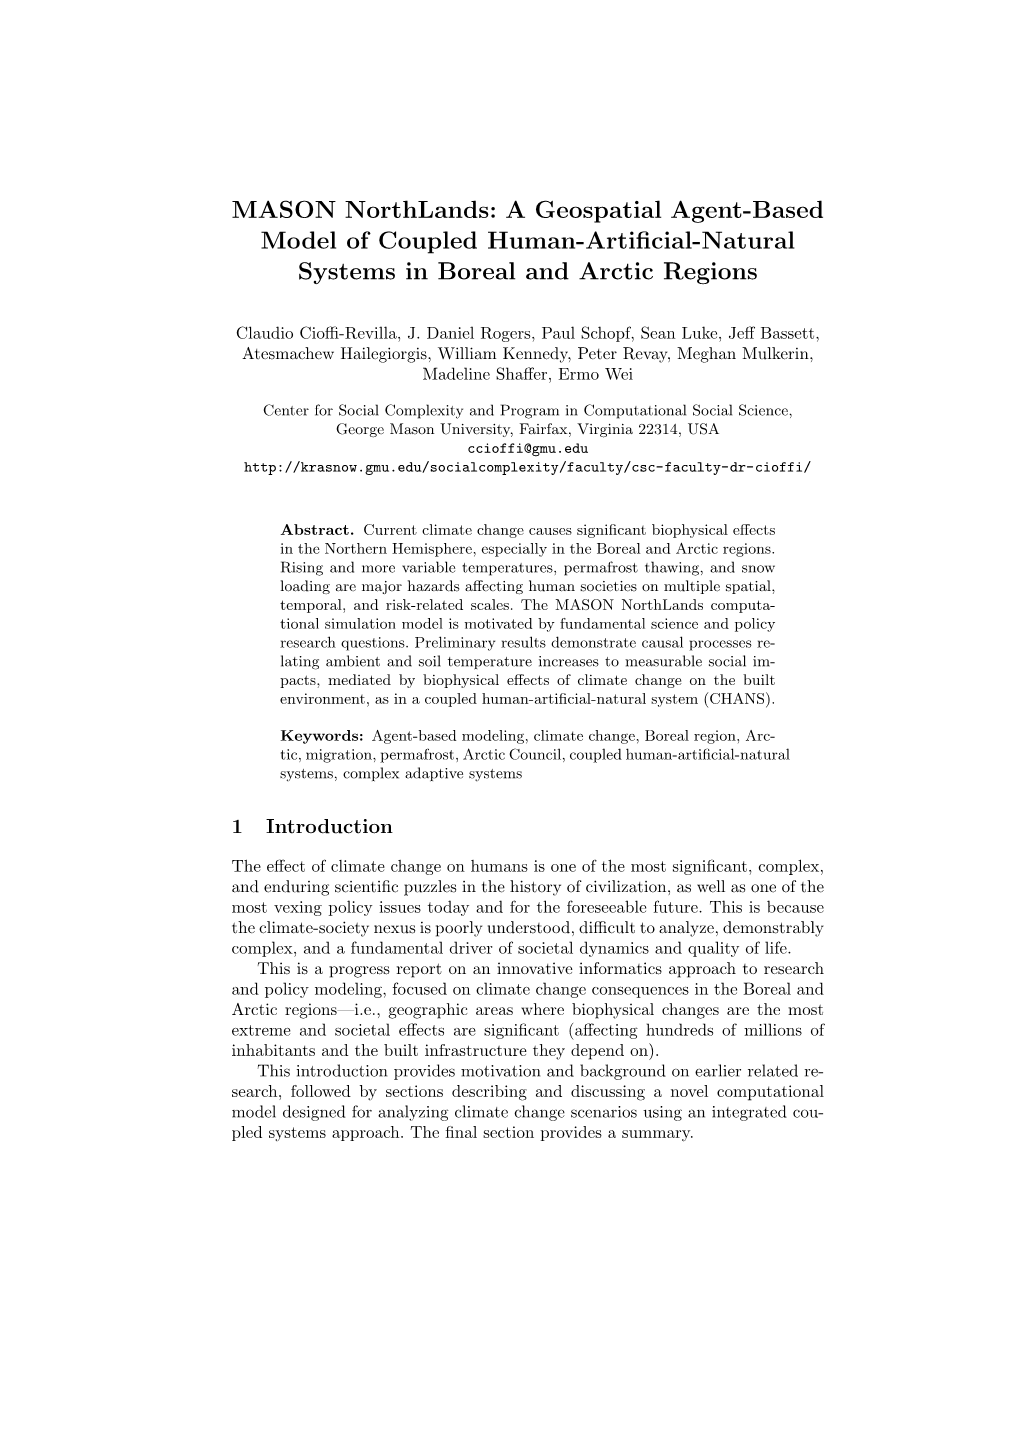 MASON Northlands: a Geospatial Agent-Based Model of Coupled Human-Artiﬁcial-Natural Systems in Boreal and Arctic Regions